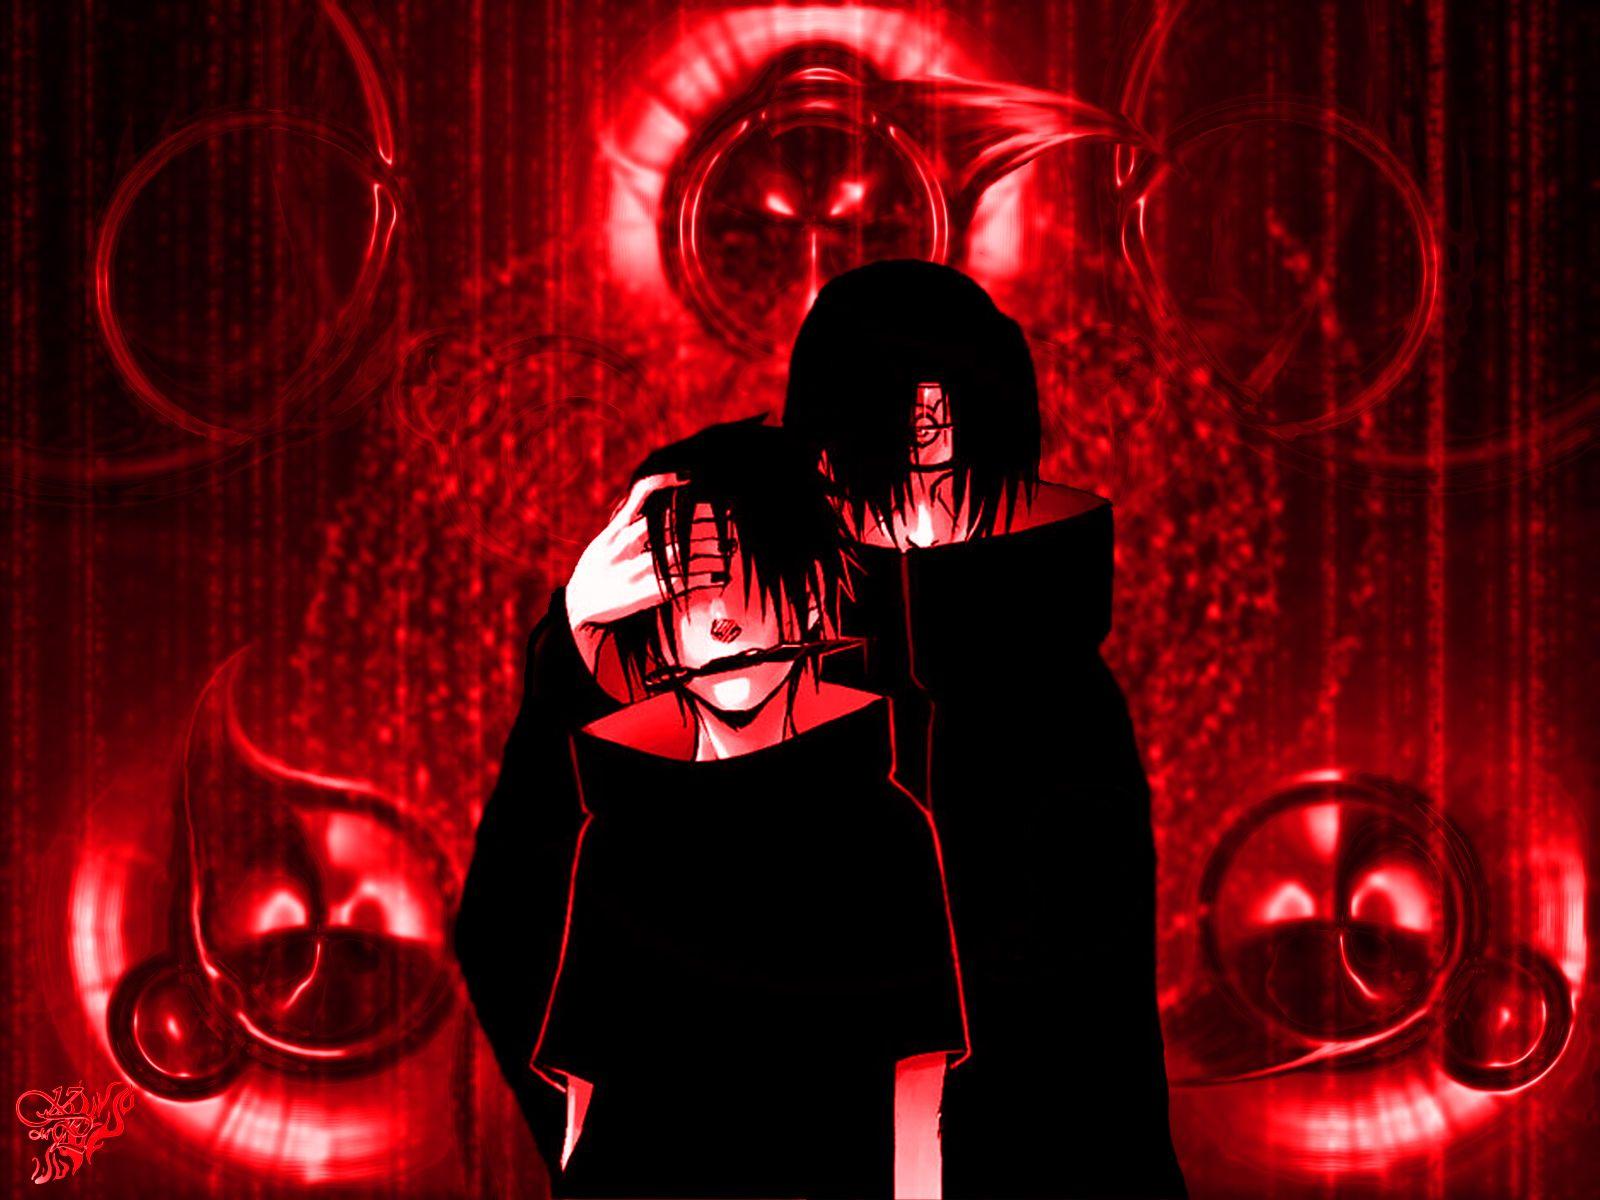 GUCII Anbu Wallpaper Itachi Uchiha Canvas Art Poster and Wall Art Picture  Print Modern Family Room Decor Poster 24 x 36 Inches 60 x 90 cm   Amazonde Home  Kitchen